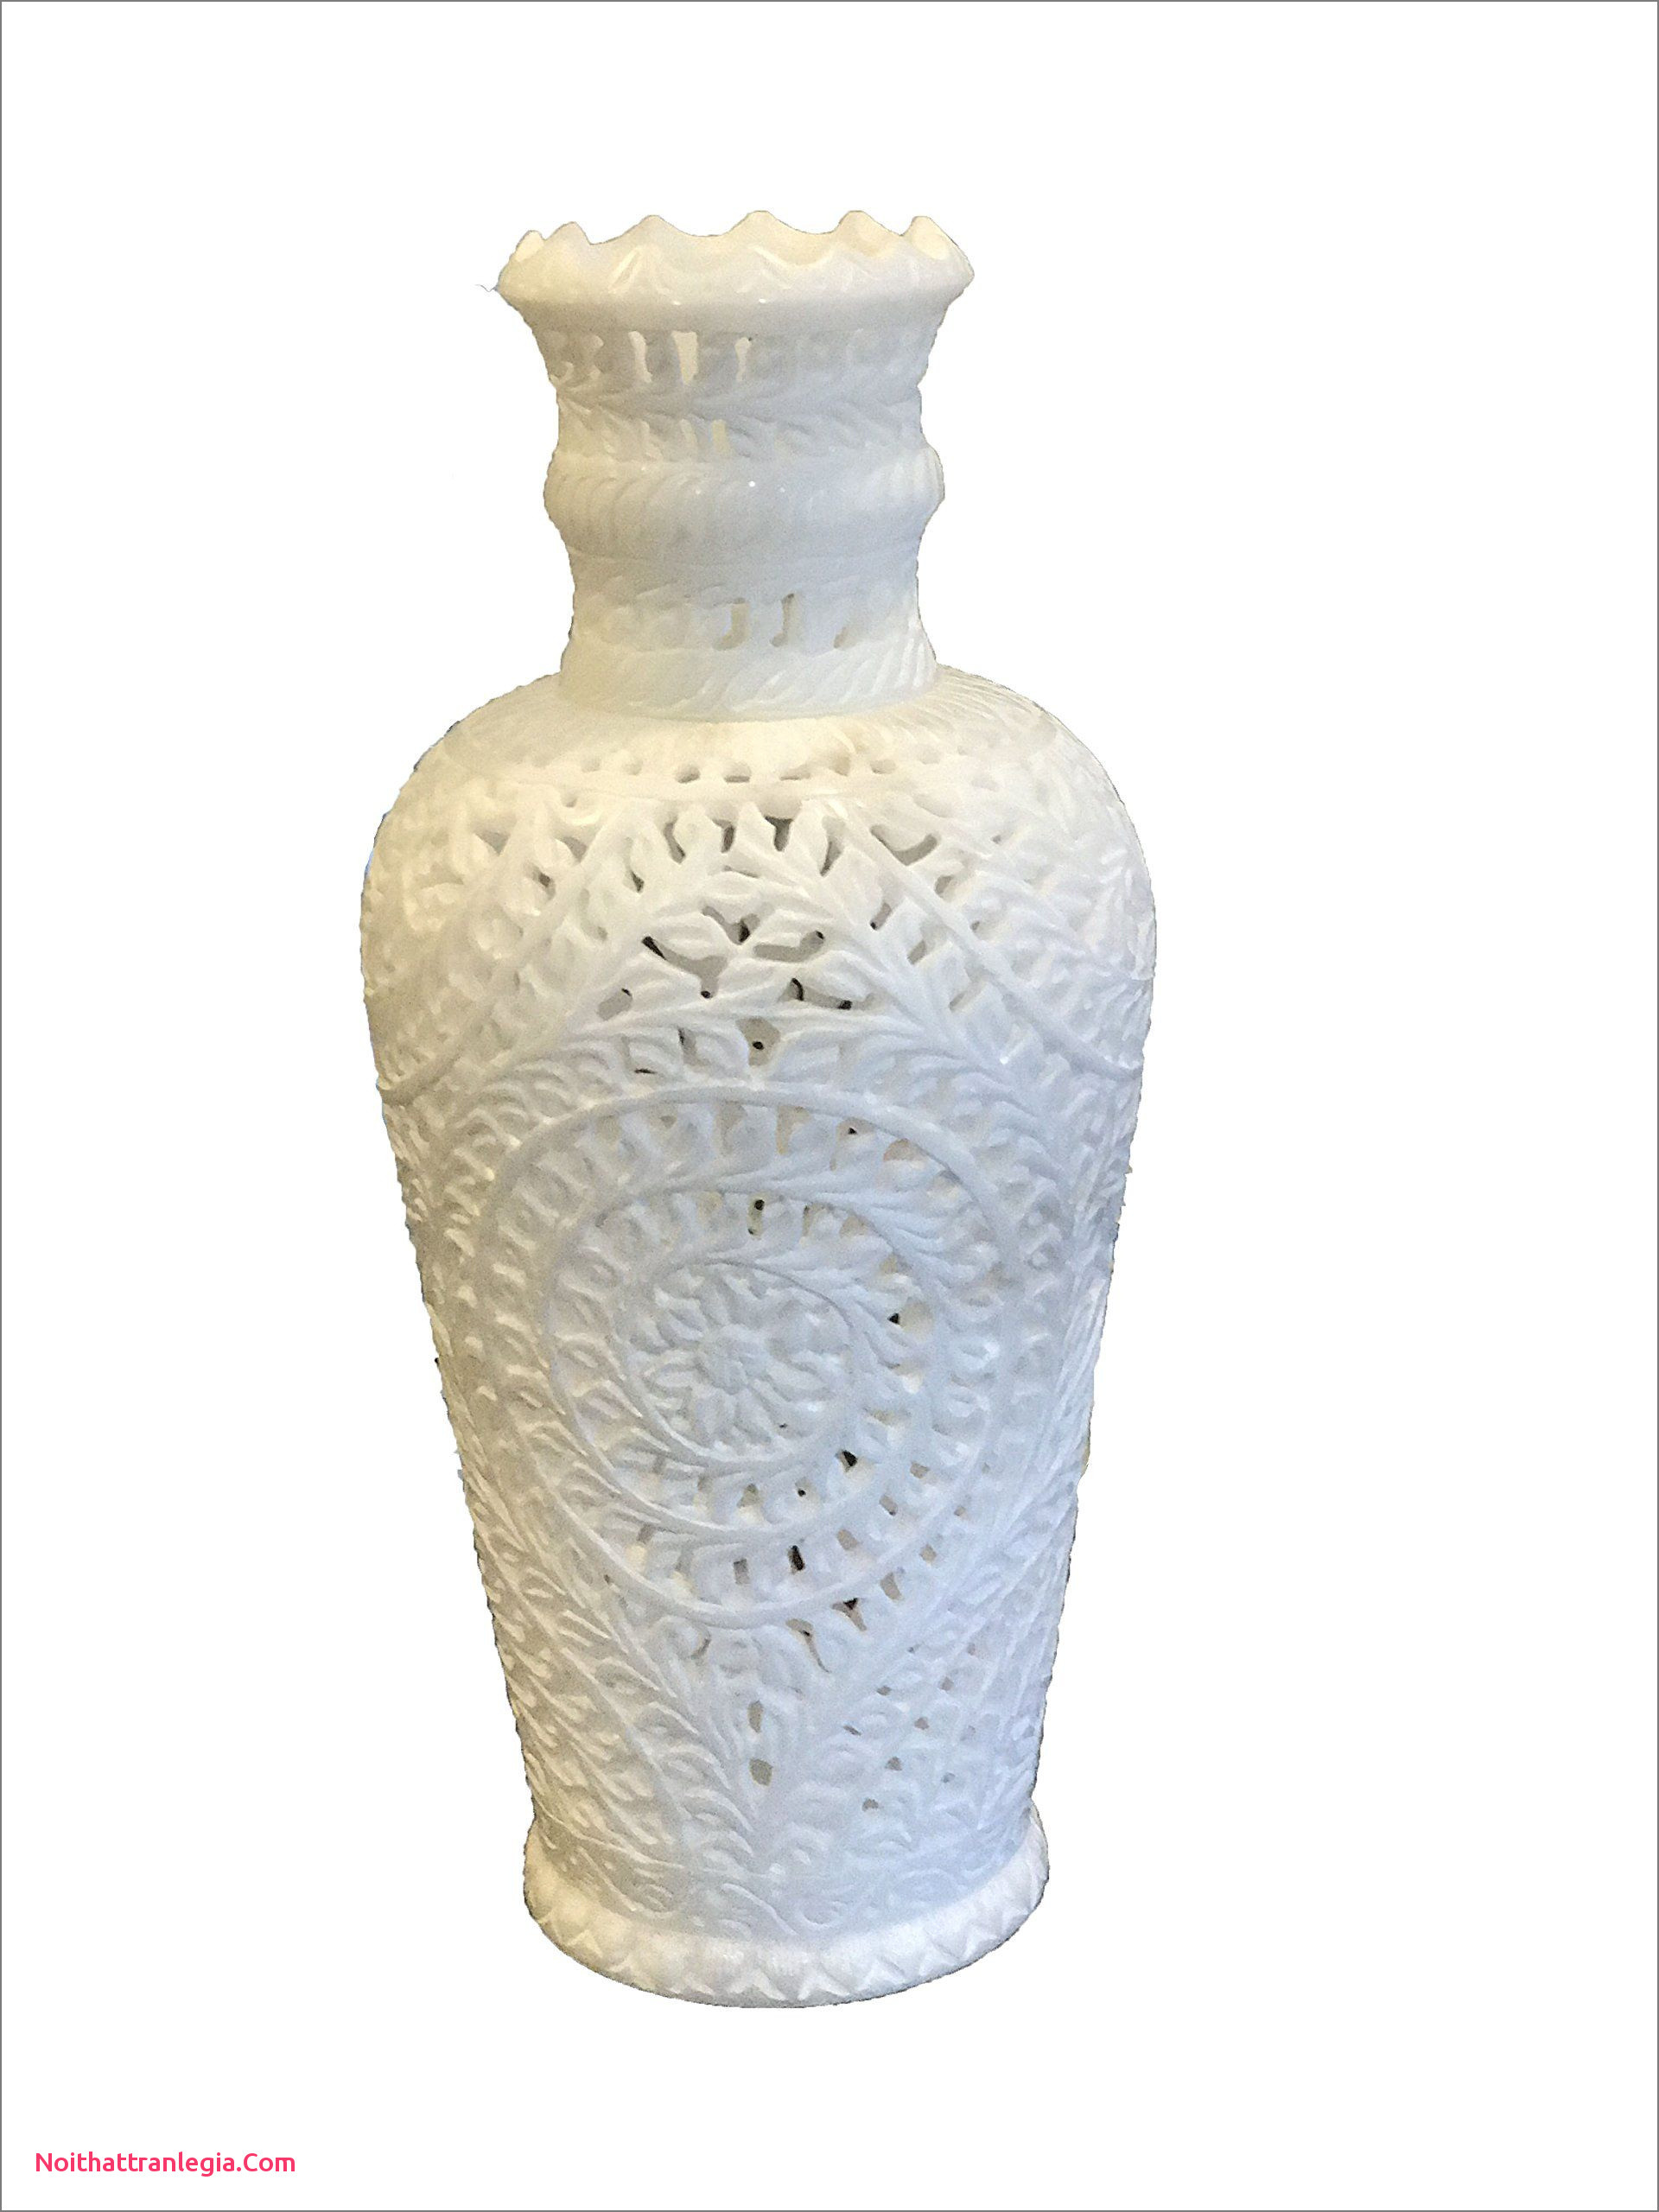 21 Fabulous Yellow Pottery Vase 2024 free download yellow pottery vase of 20 how to clean flower vases noithattranlegia vases design regarding white marble flower vase handcrafted stone decorative wedding diy vases handcrafted by artisans th